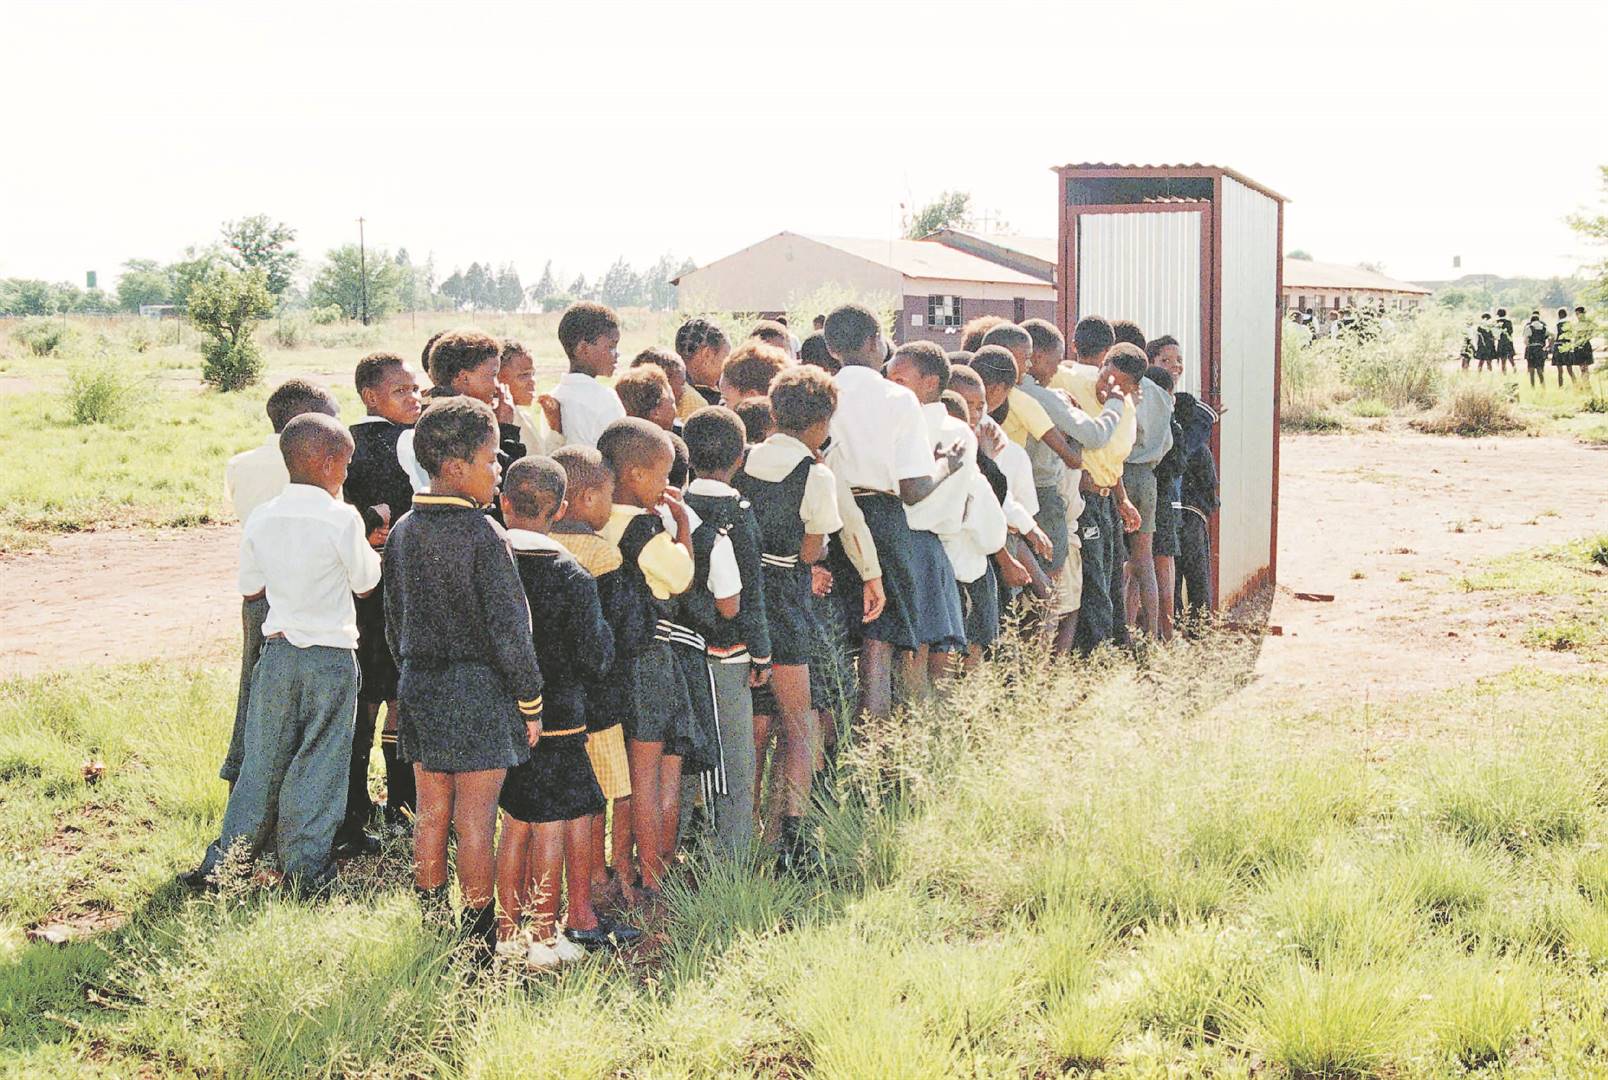 Learners queuing for the toilet at Terra Peccana Primary School. Photo: Sipho Maluka